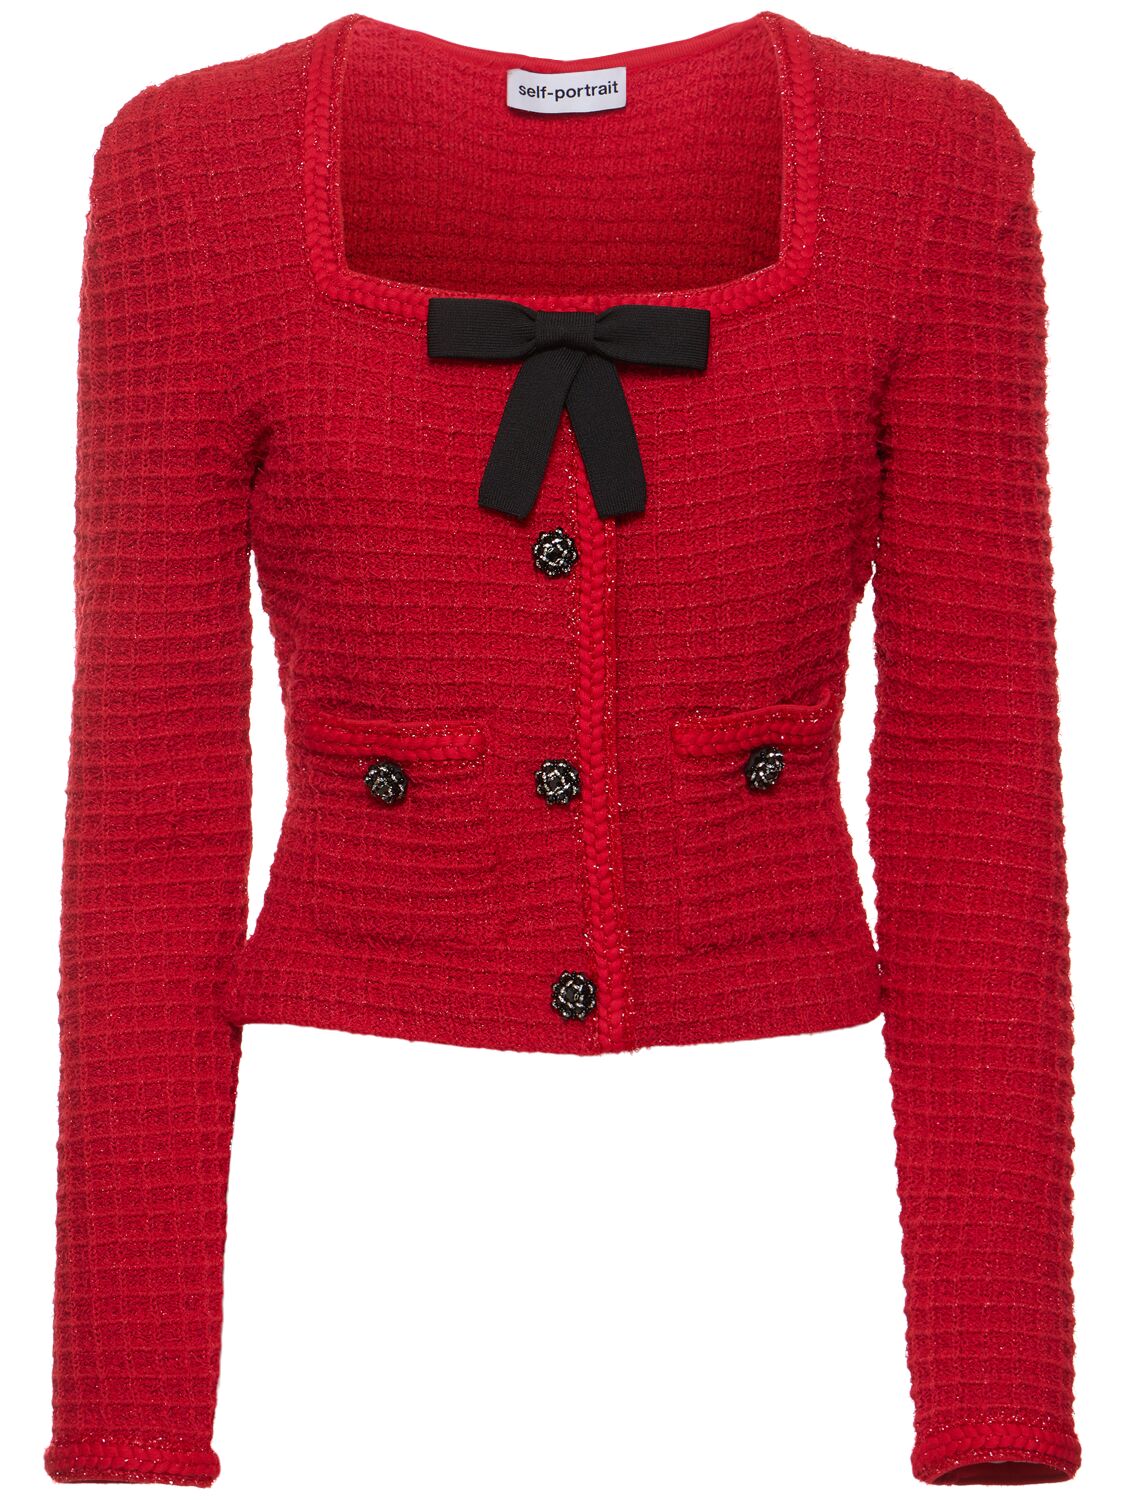 Self-portrait Knit Bow Top In Red